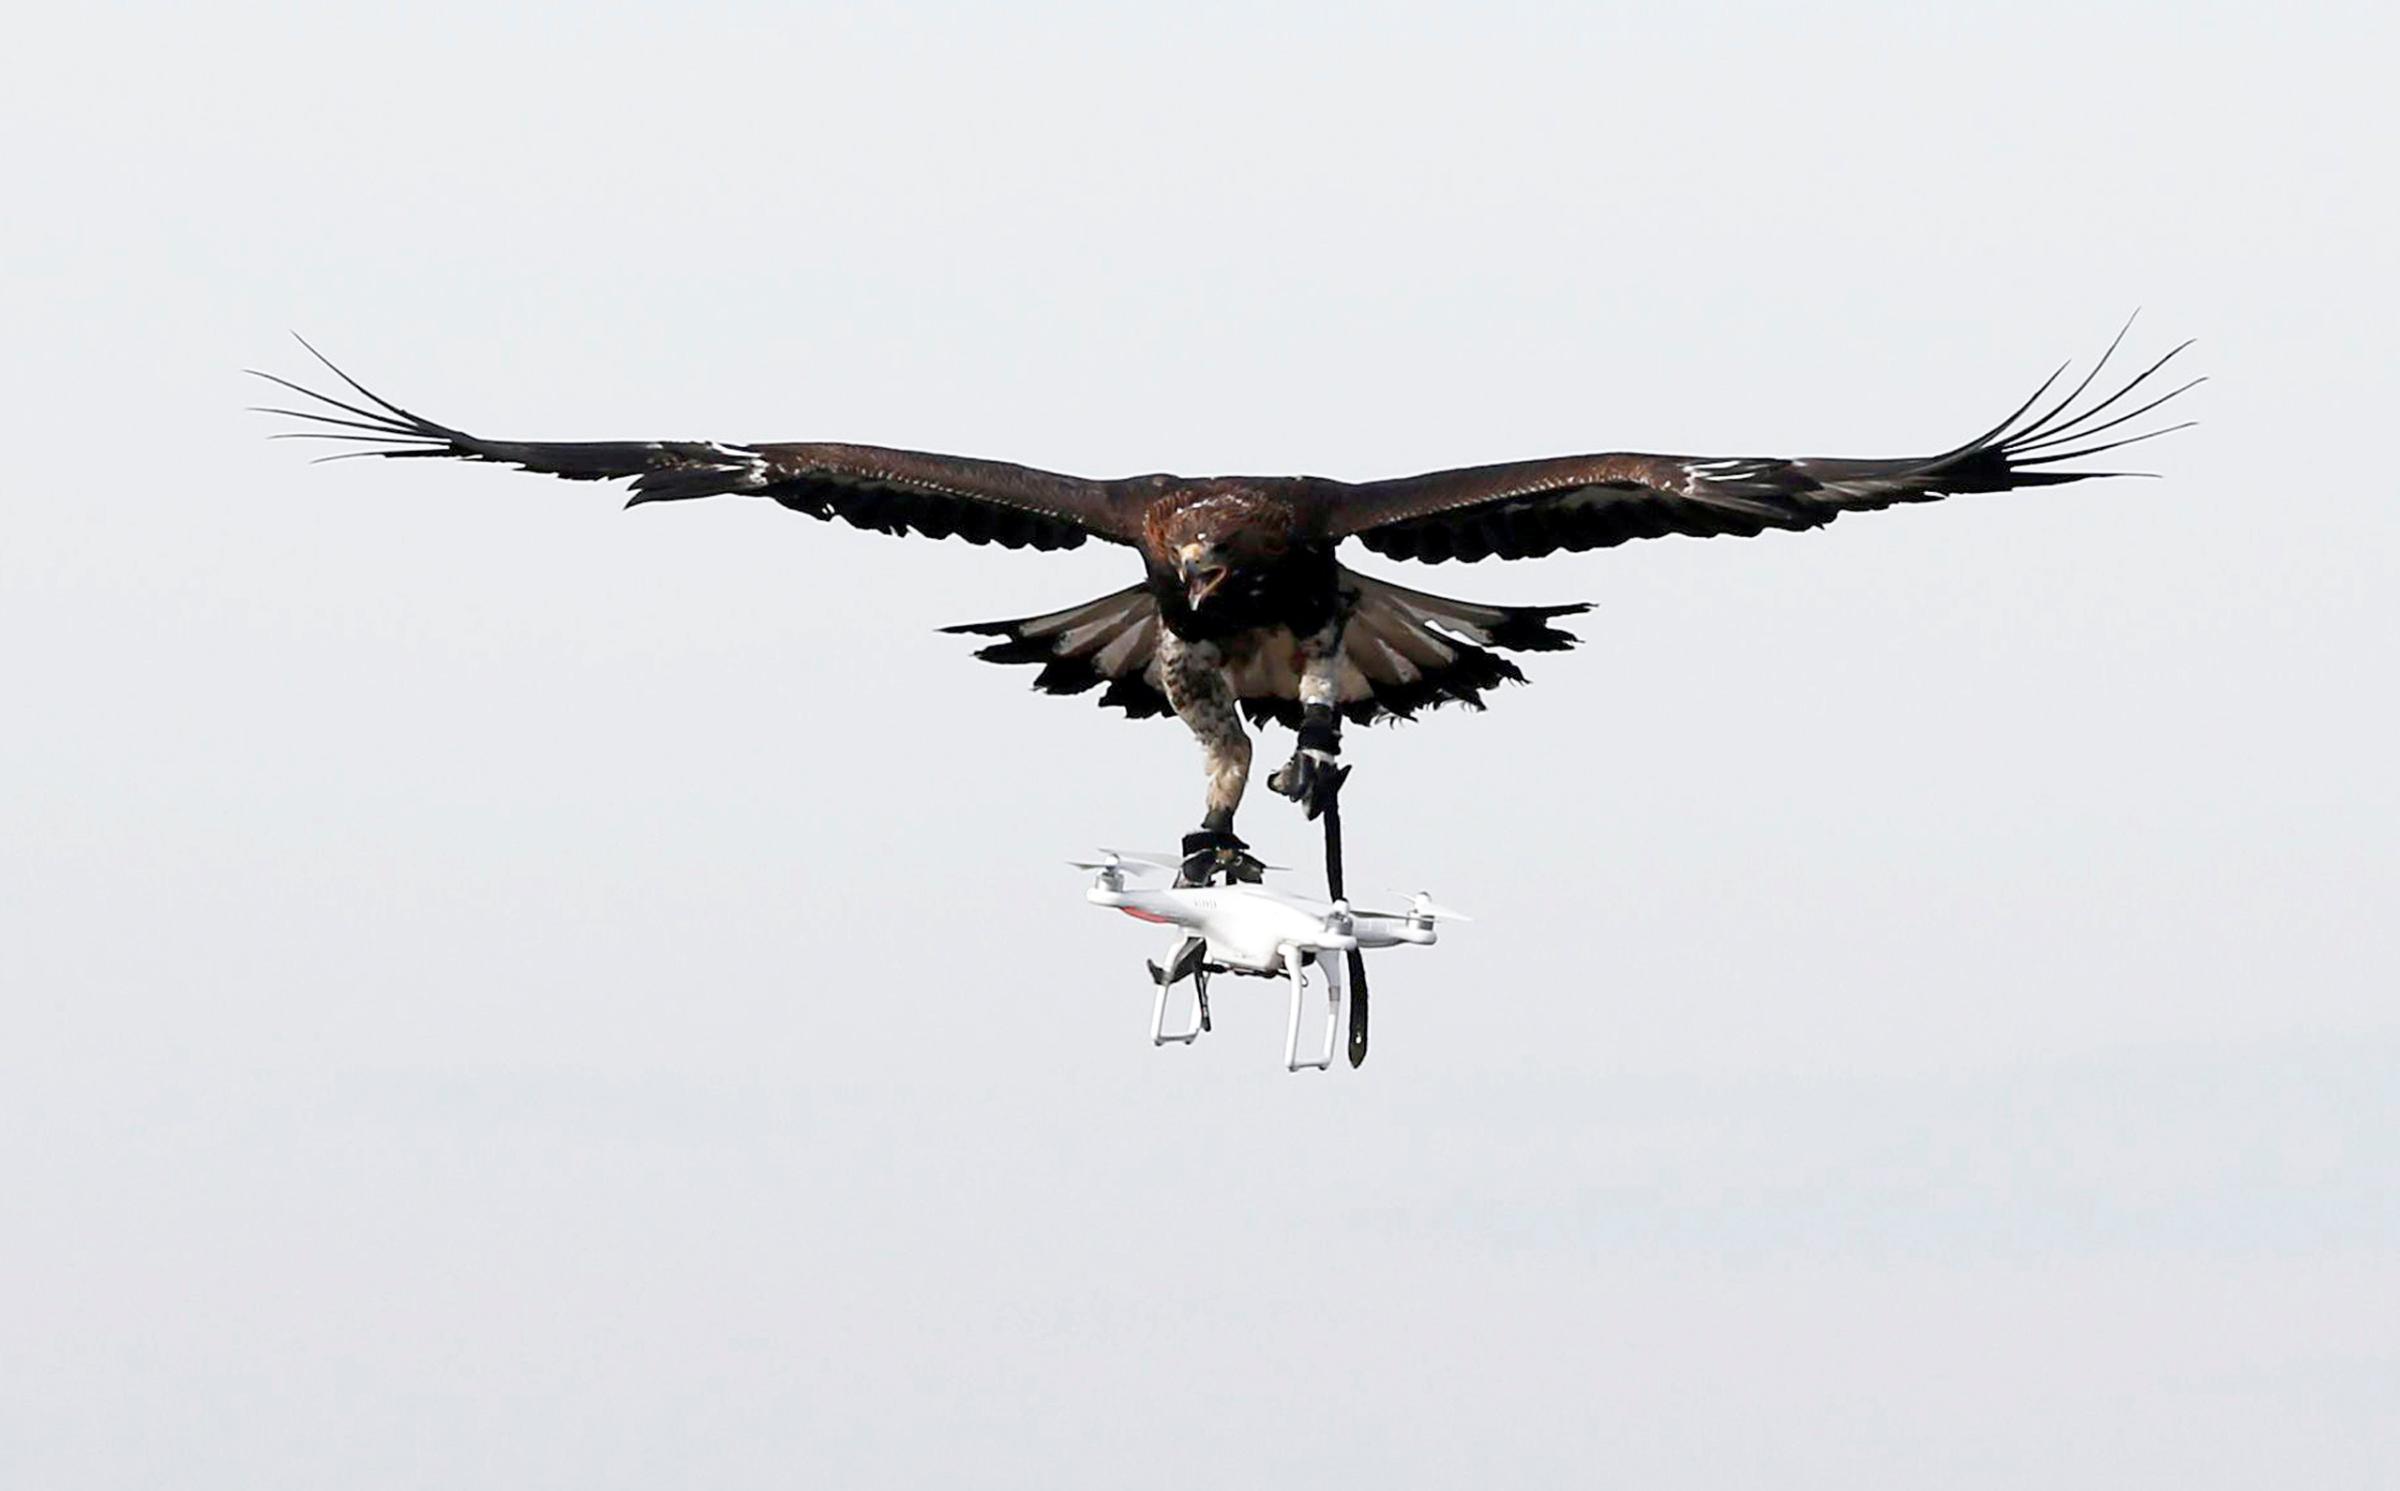 A golden eagle carries a flying drone away during a military training exercise at Mont-de-Marsan French Air Force base